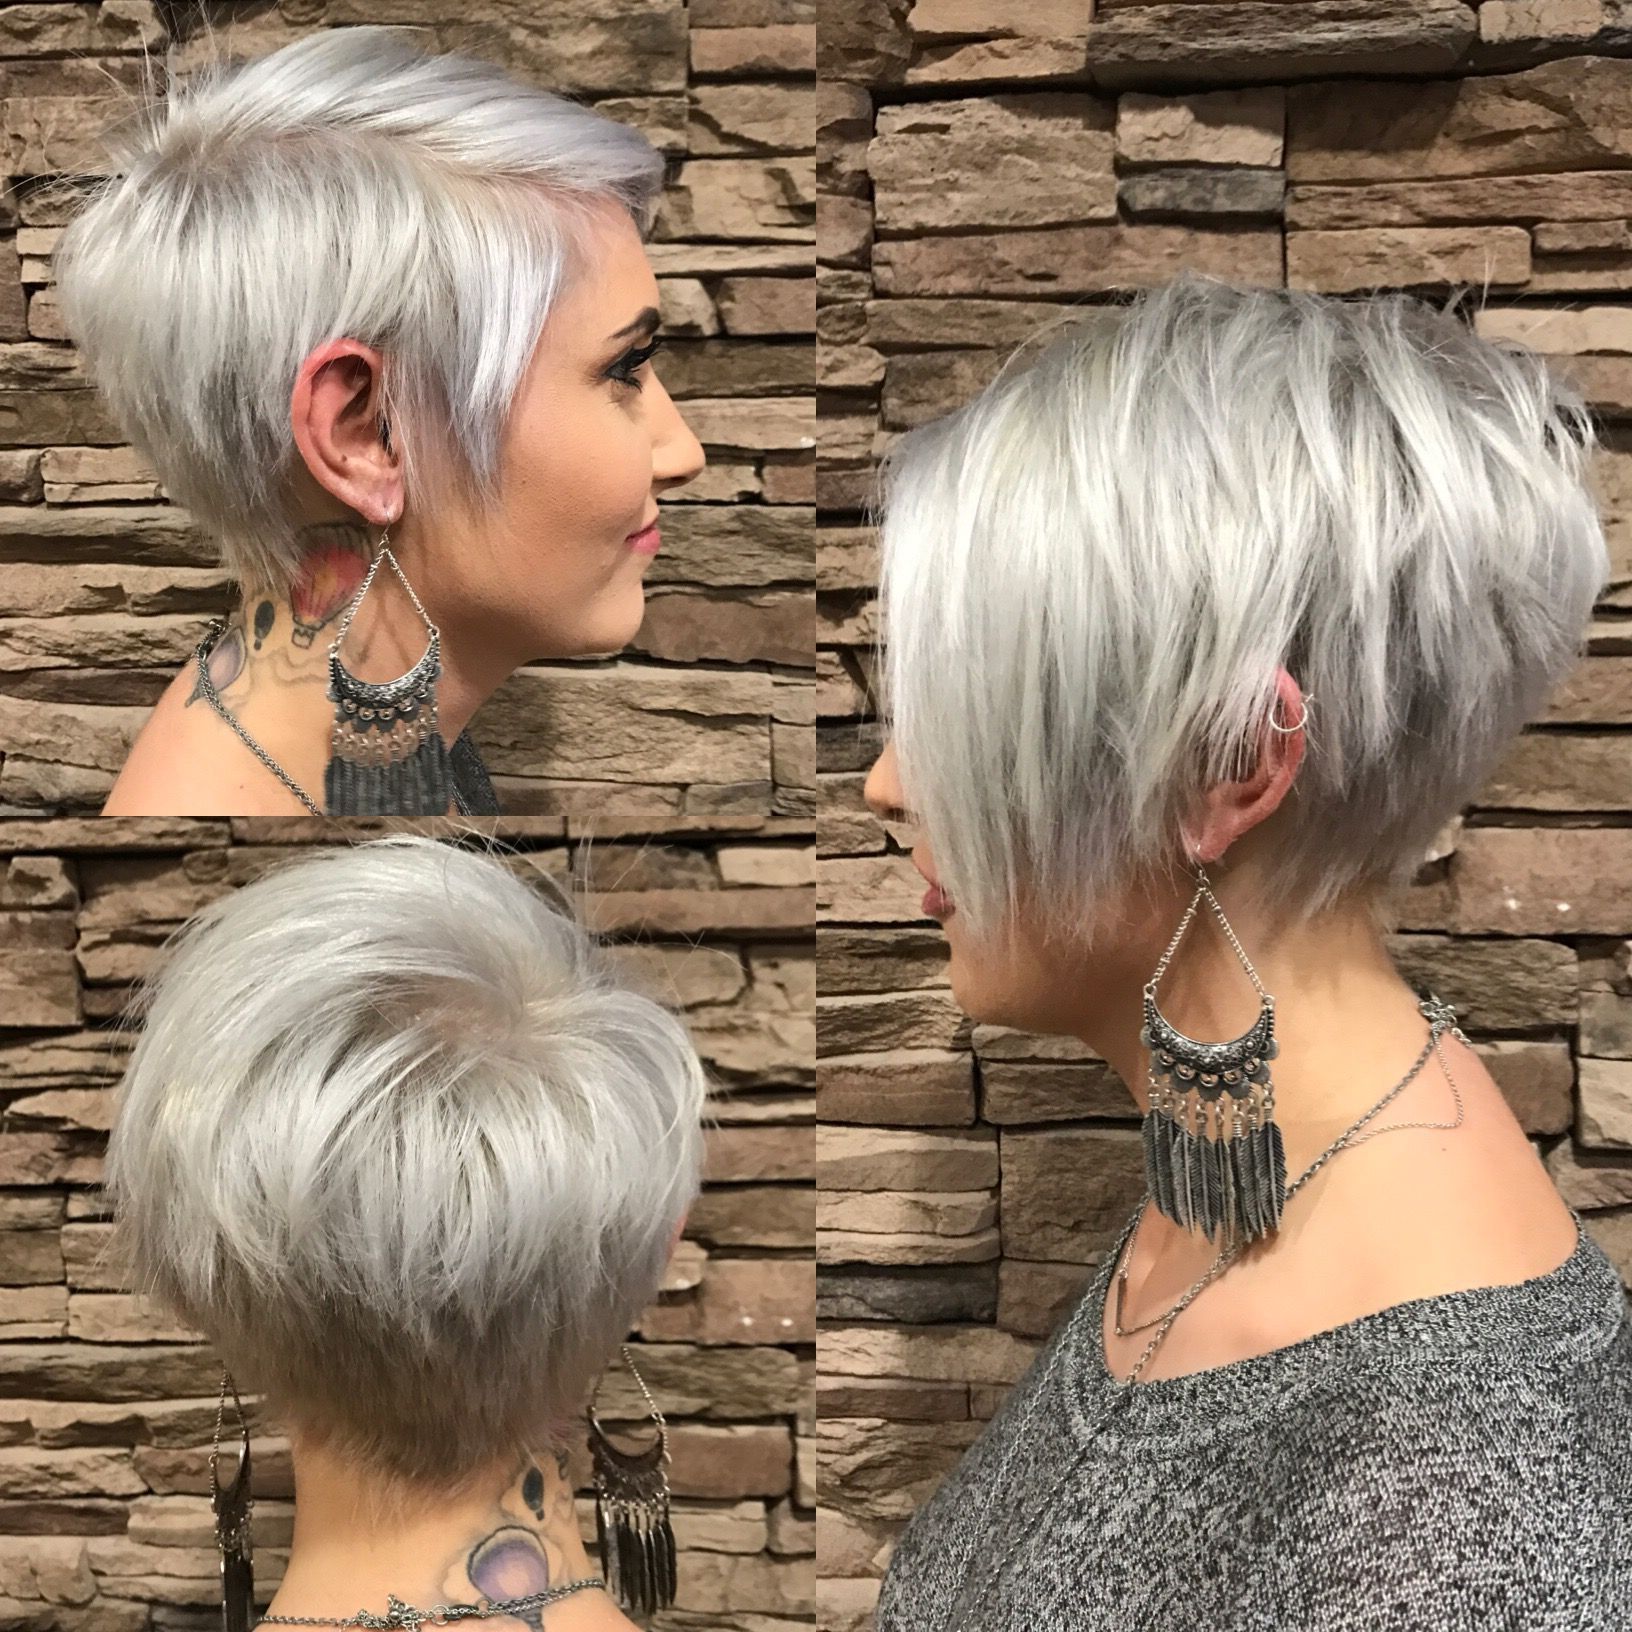 Long Pixie With Bangs, Silver | Hair Cut And Style Ideas In 2018 With Regard To Choppy Blonde Pixie Hairstyles With Long Side Bangs (View 12 of 20)